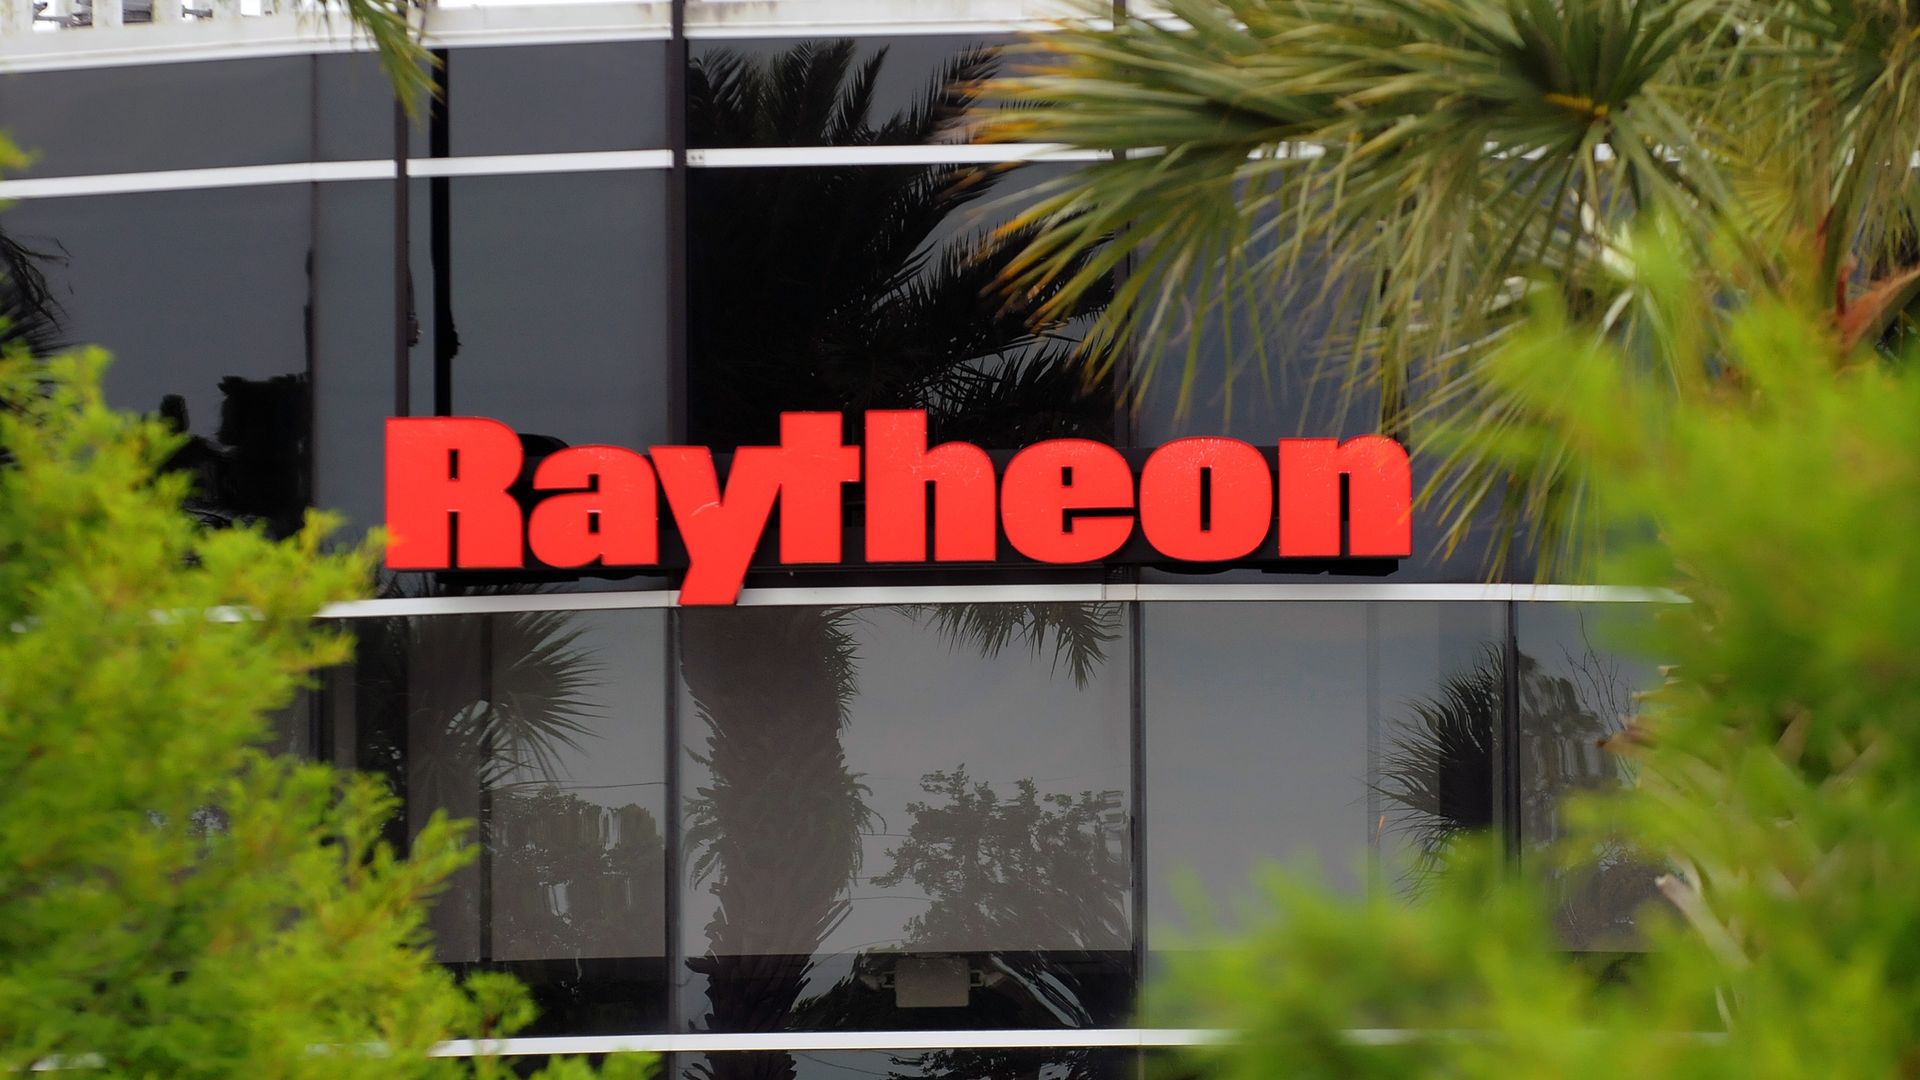 In this image, the Raytheon logo is seen on the side of a glass building, framed by trees.